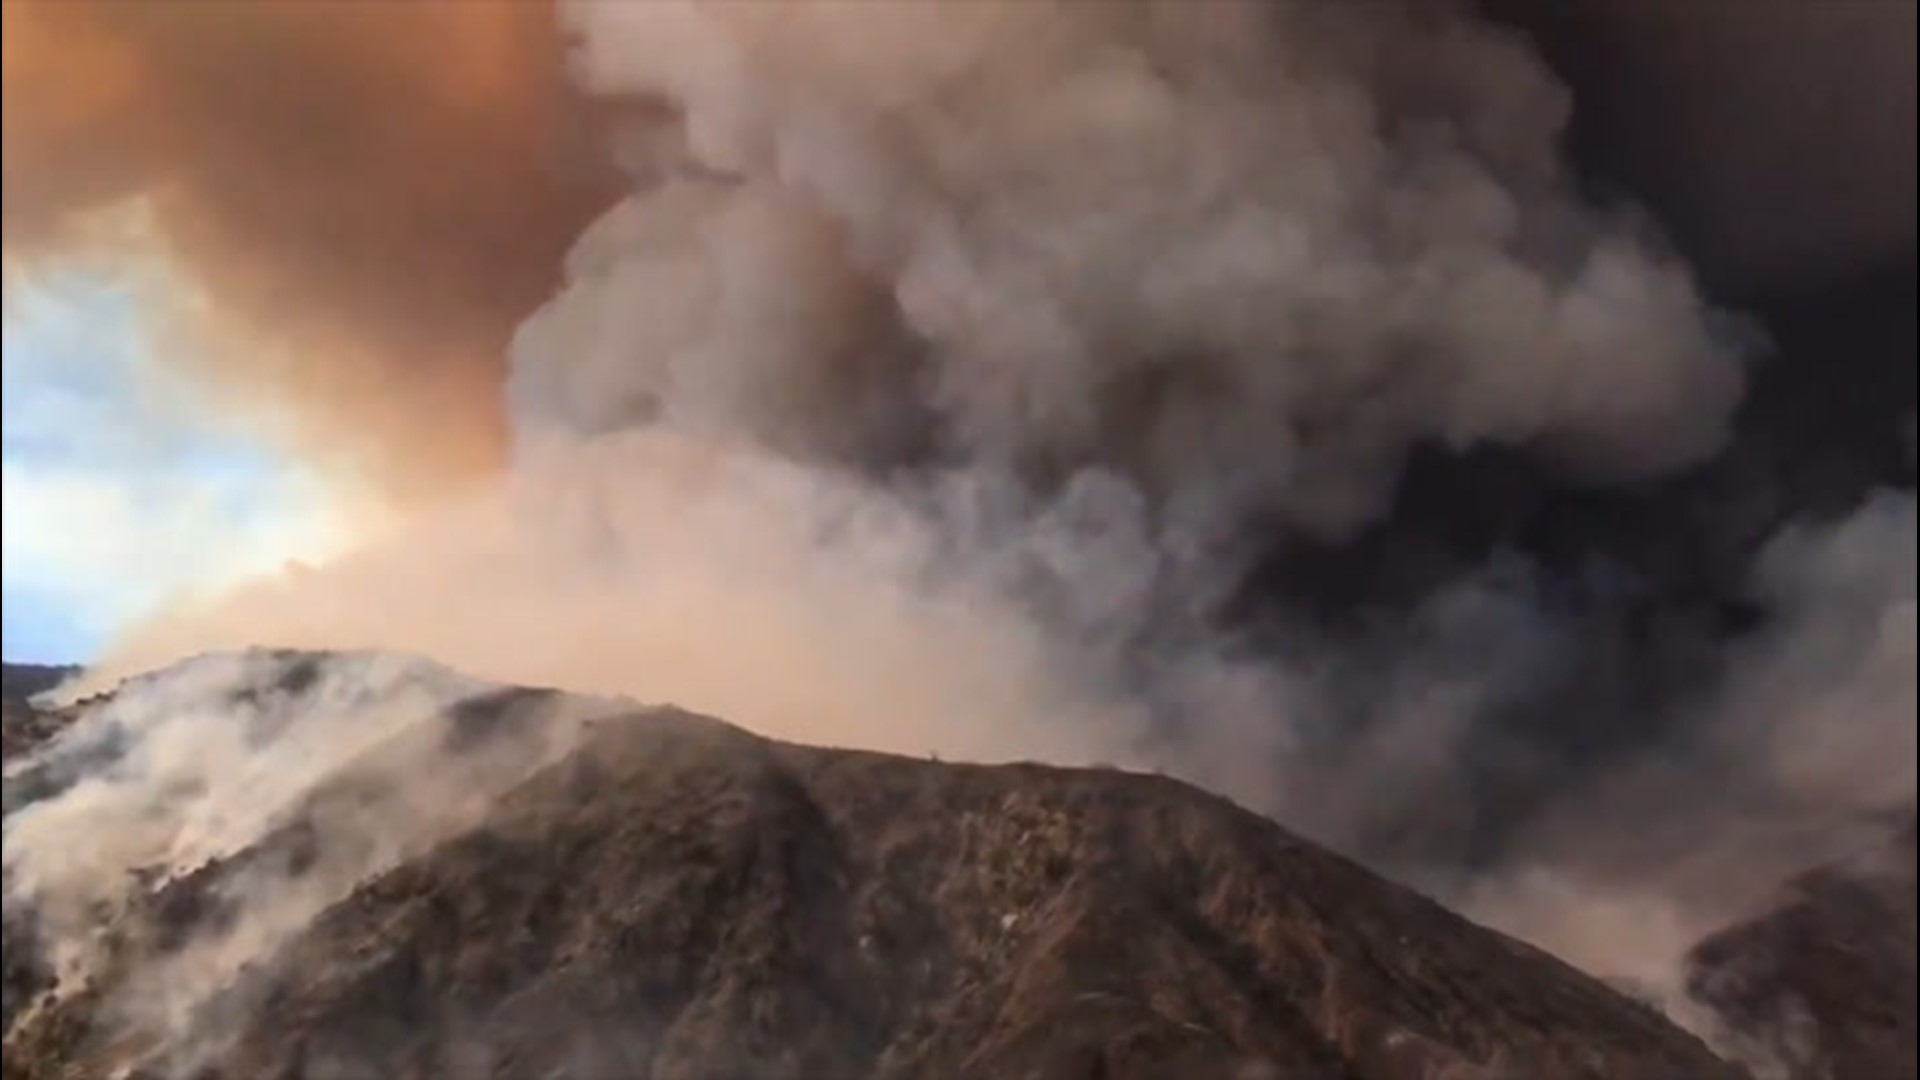 Smoke from the Ranch Fire flooded the sky on Aug. 13, as the fire roared on the hills in Los Angeles County, California.